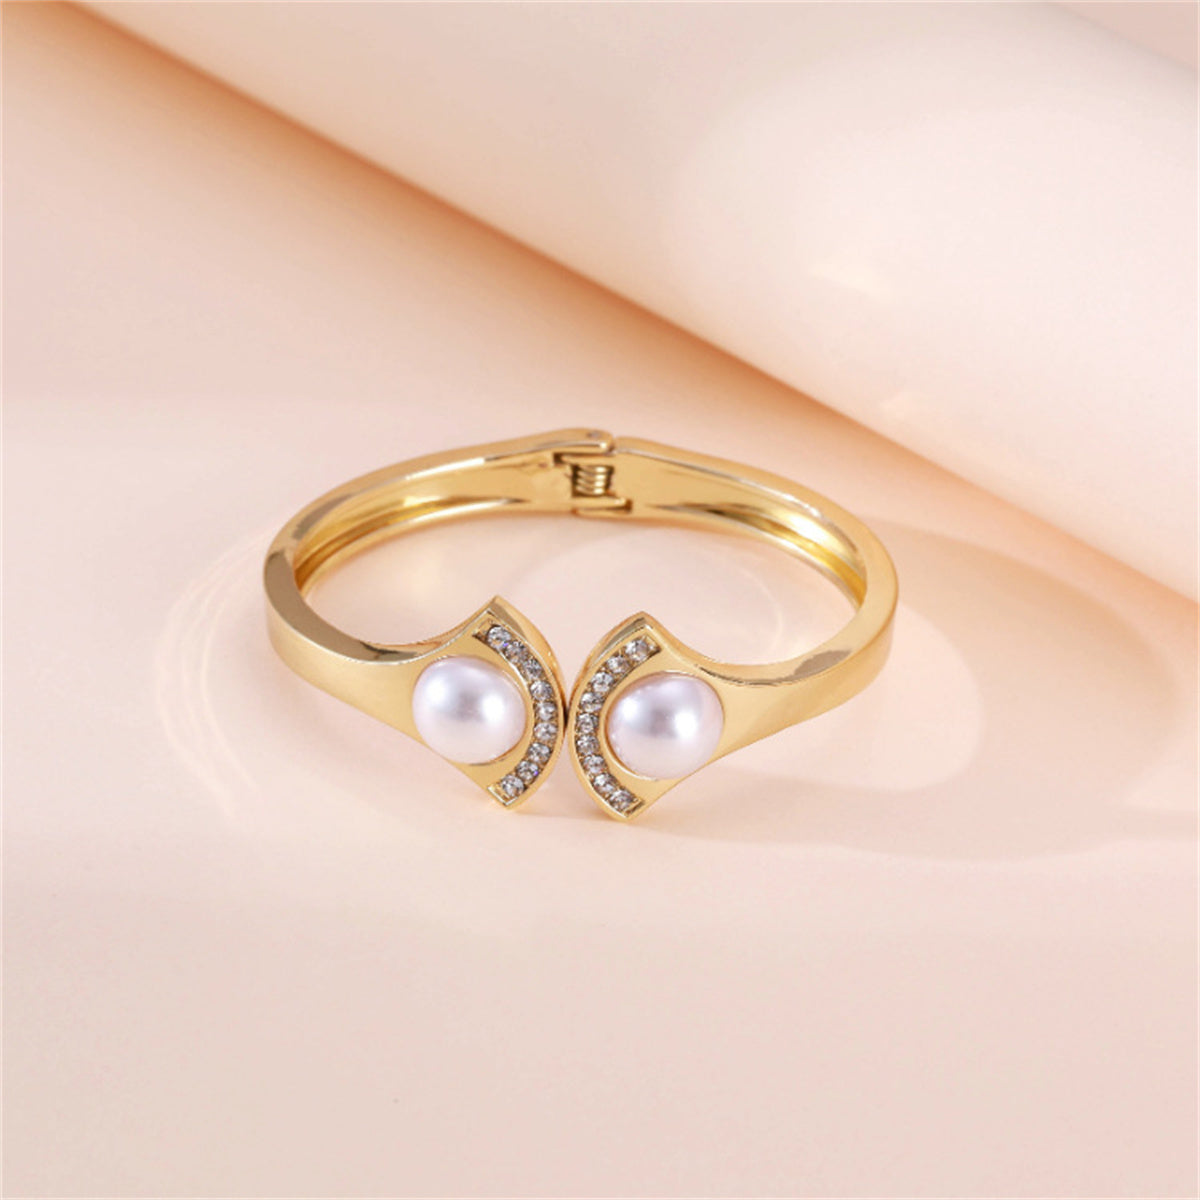 Pearl & Cubic Zirconia 18K Gold-Plated Fan-End Bangle